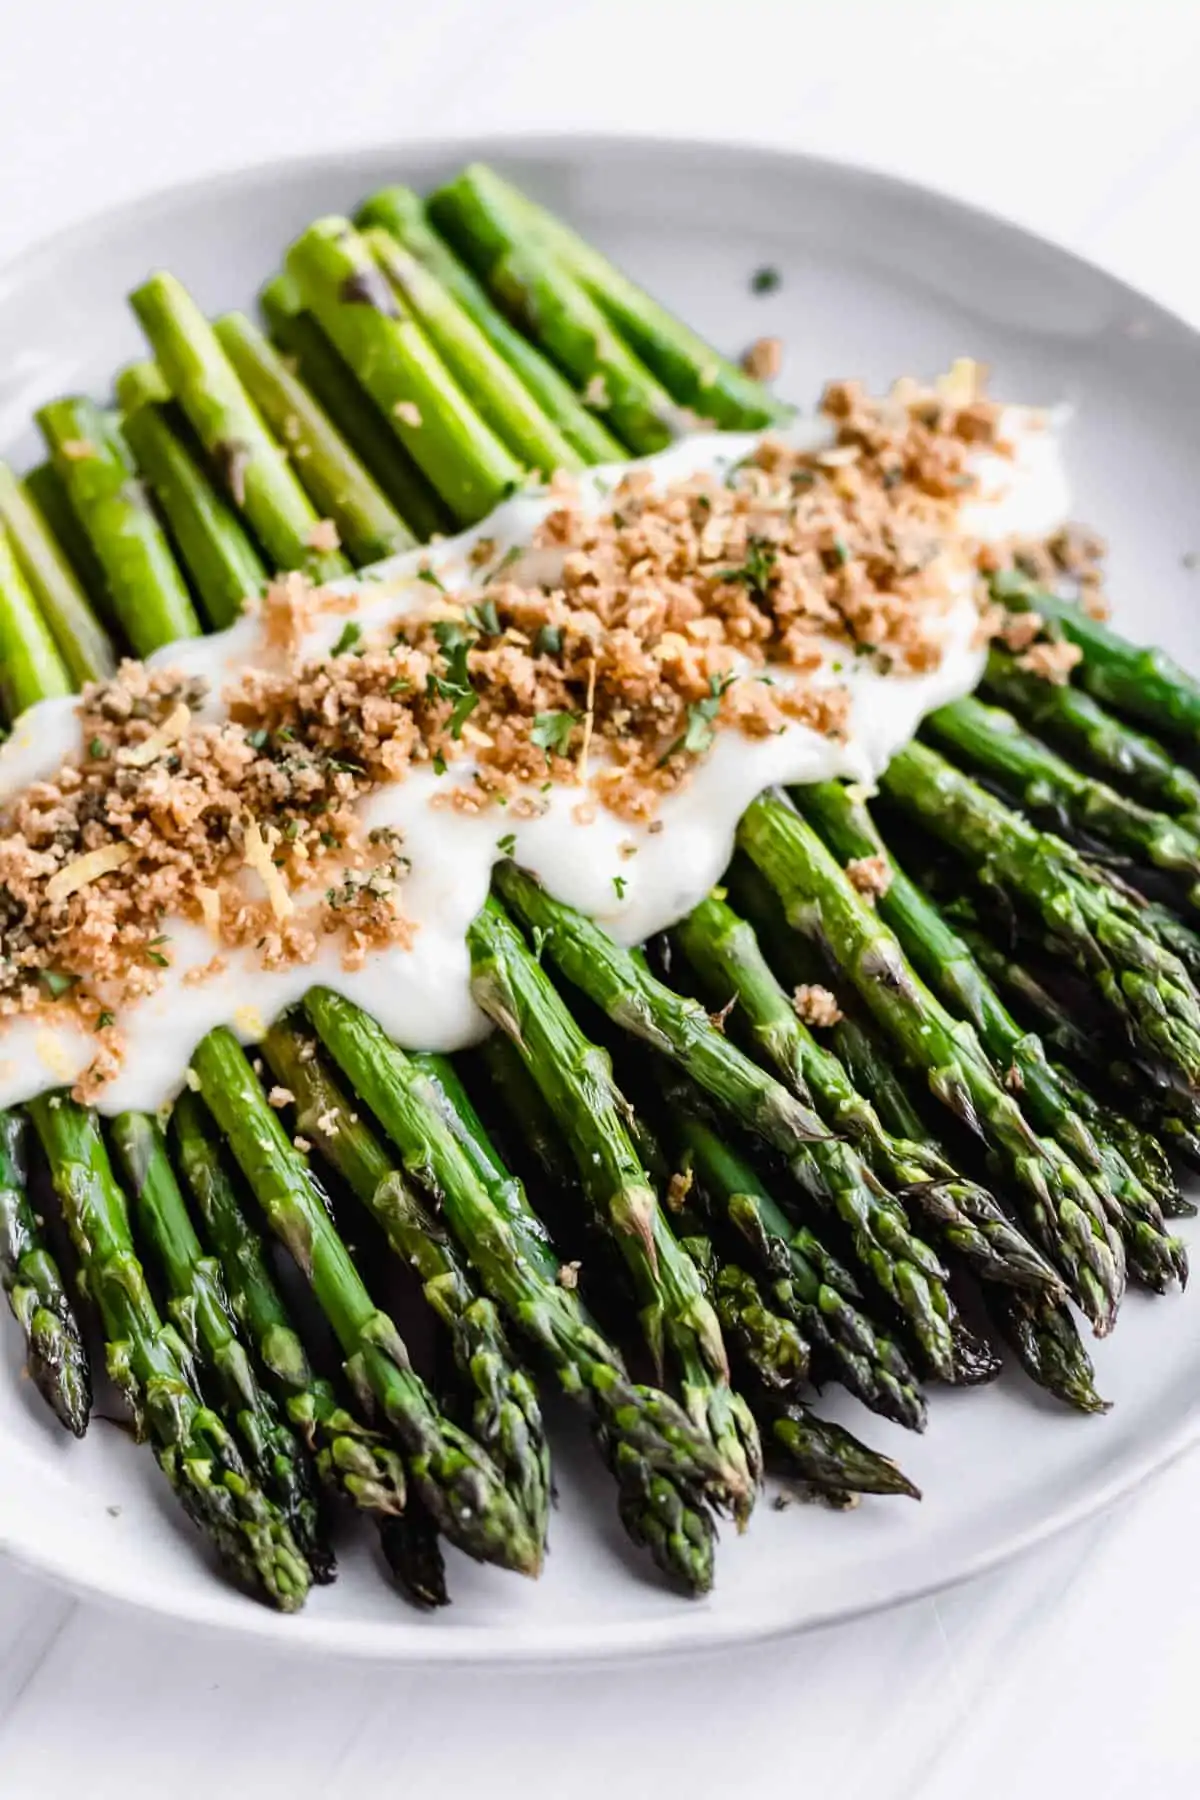 Broiled Asparagus with Parmesan Cheese Sauce by Delicious Little Bites // FoodNouveau.com